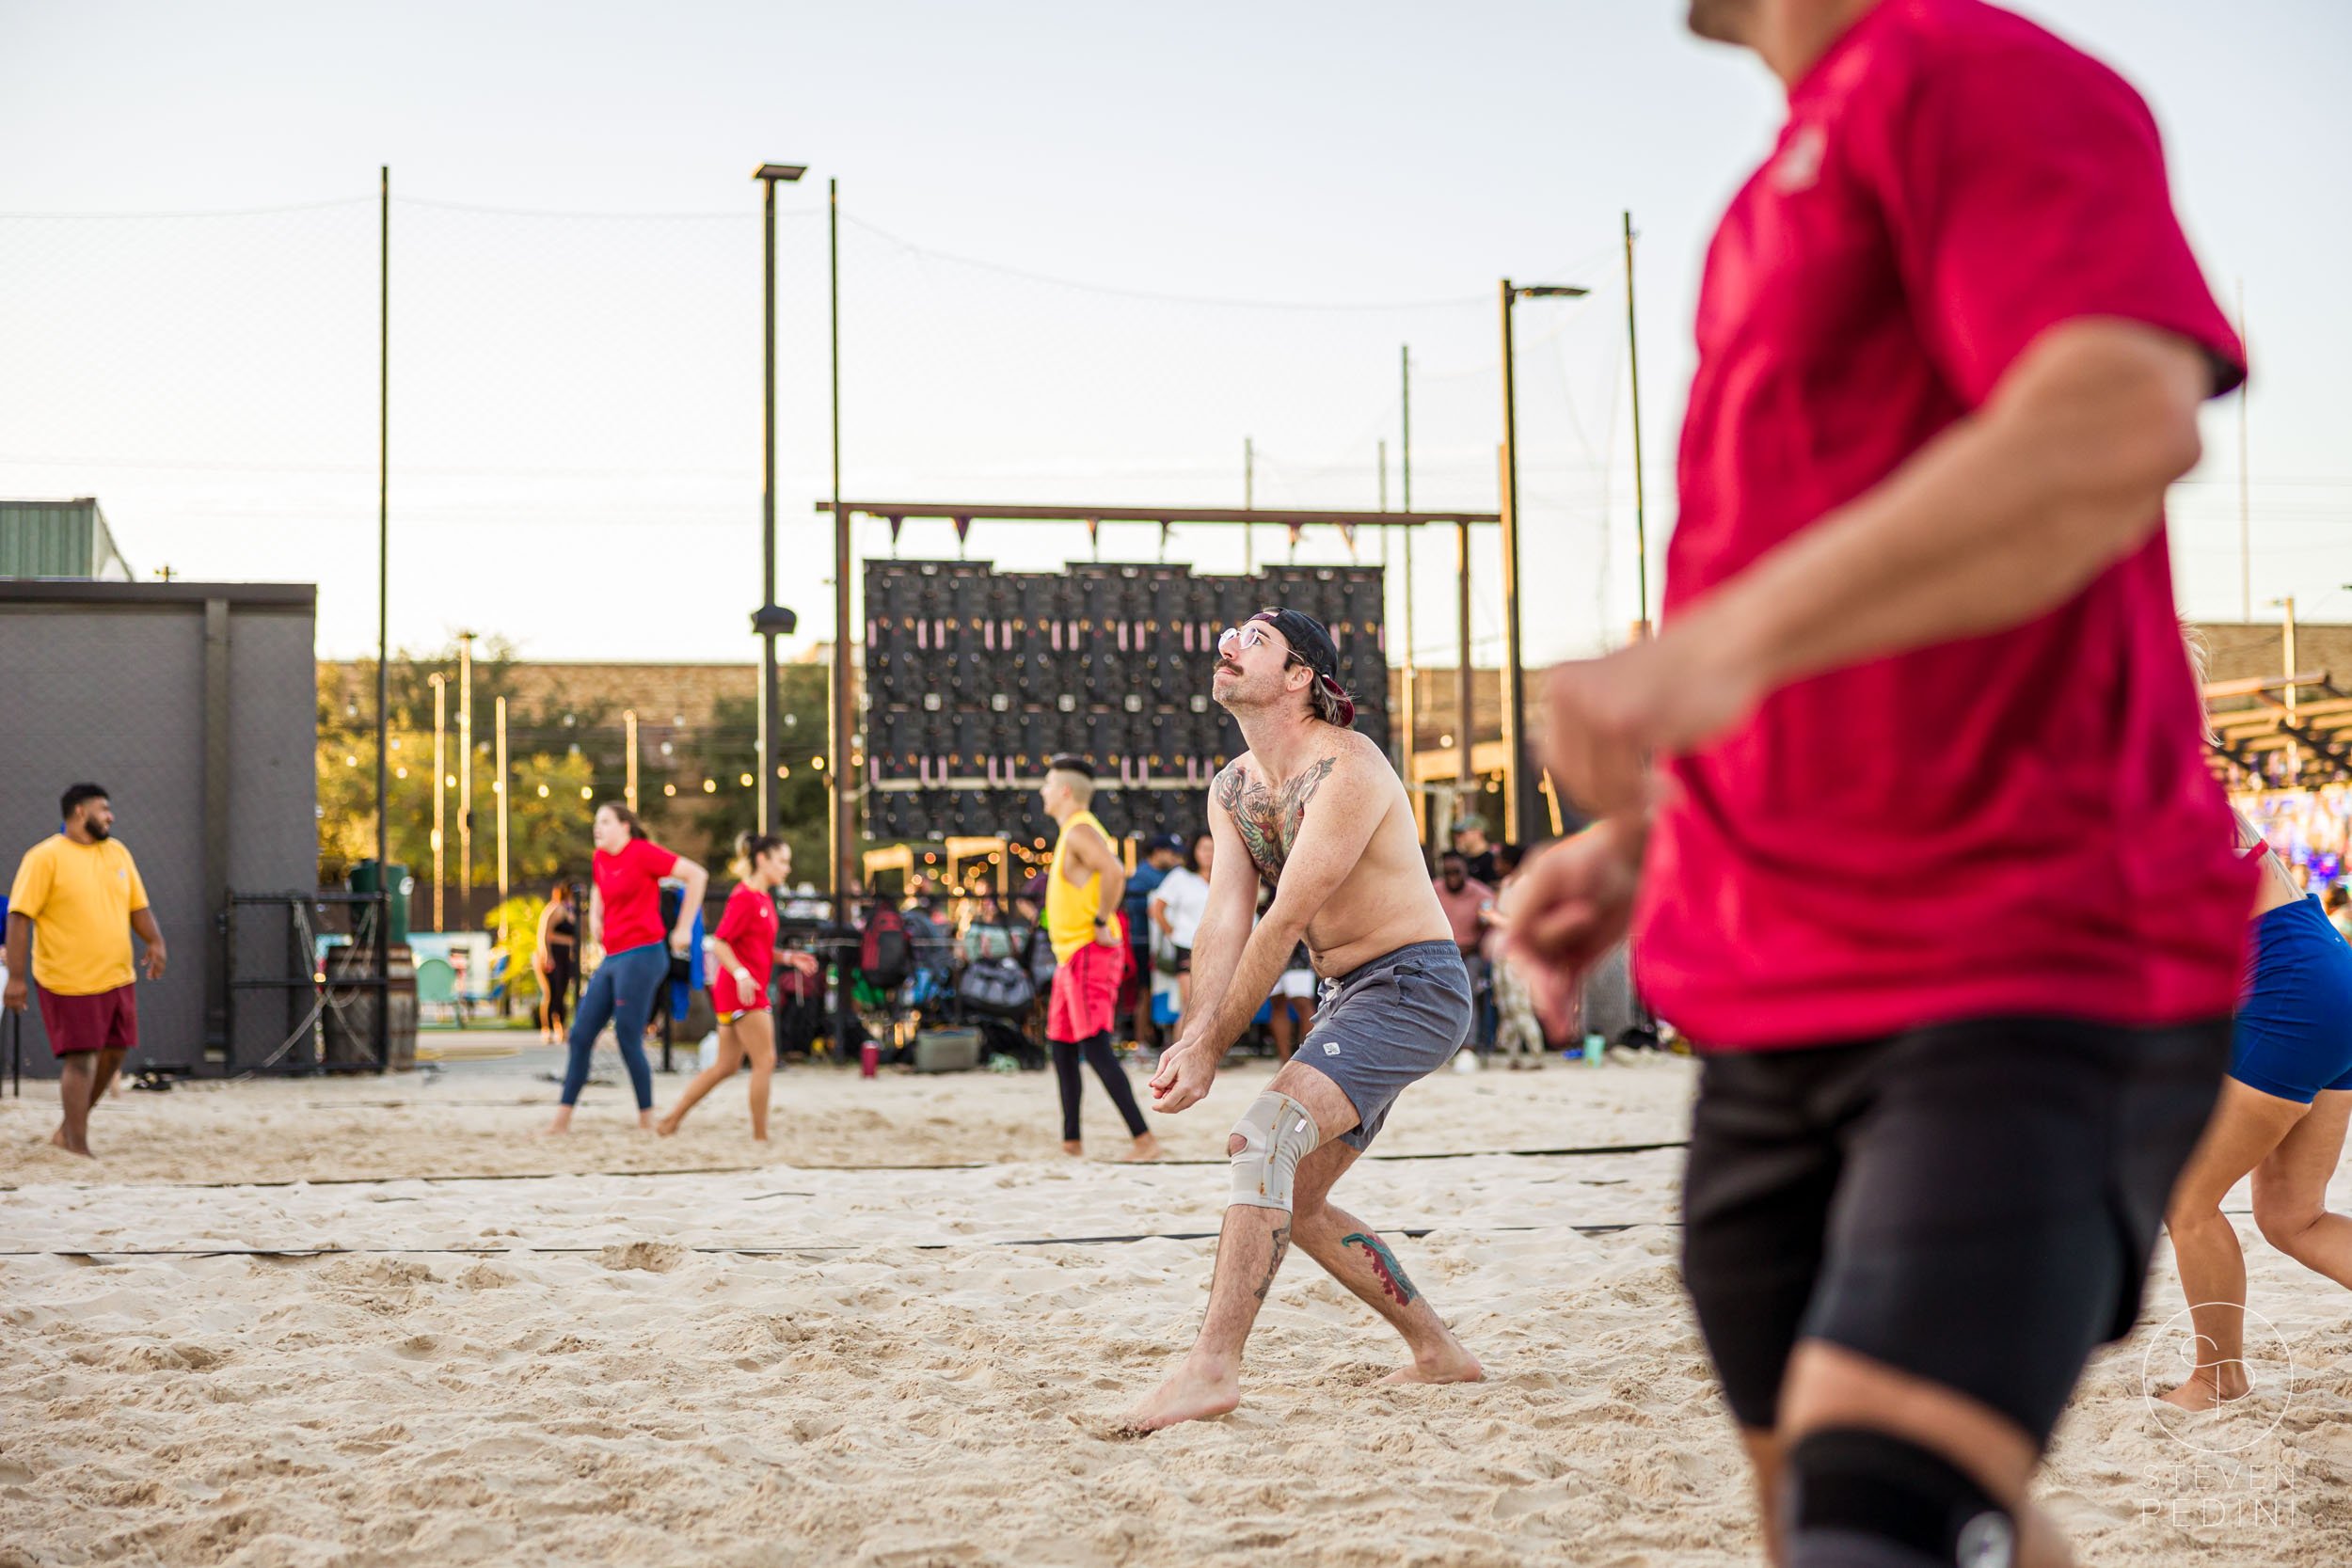 Steven Pedini Photography - Bumpy Pickle - Sand Volleyball - Houston TX - World Cup of Volleyball - 00178.jpg